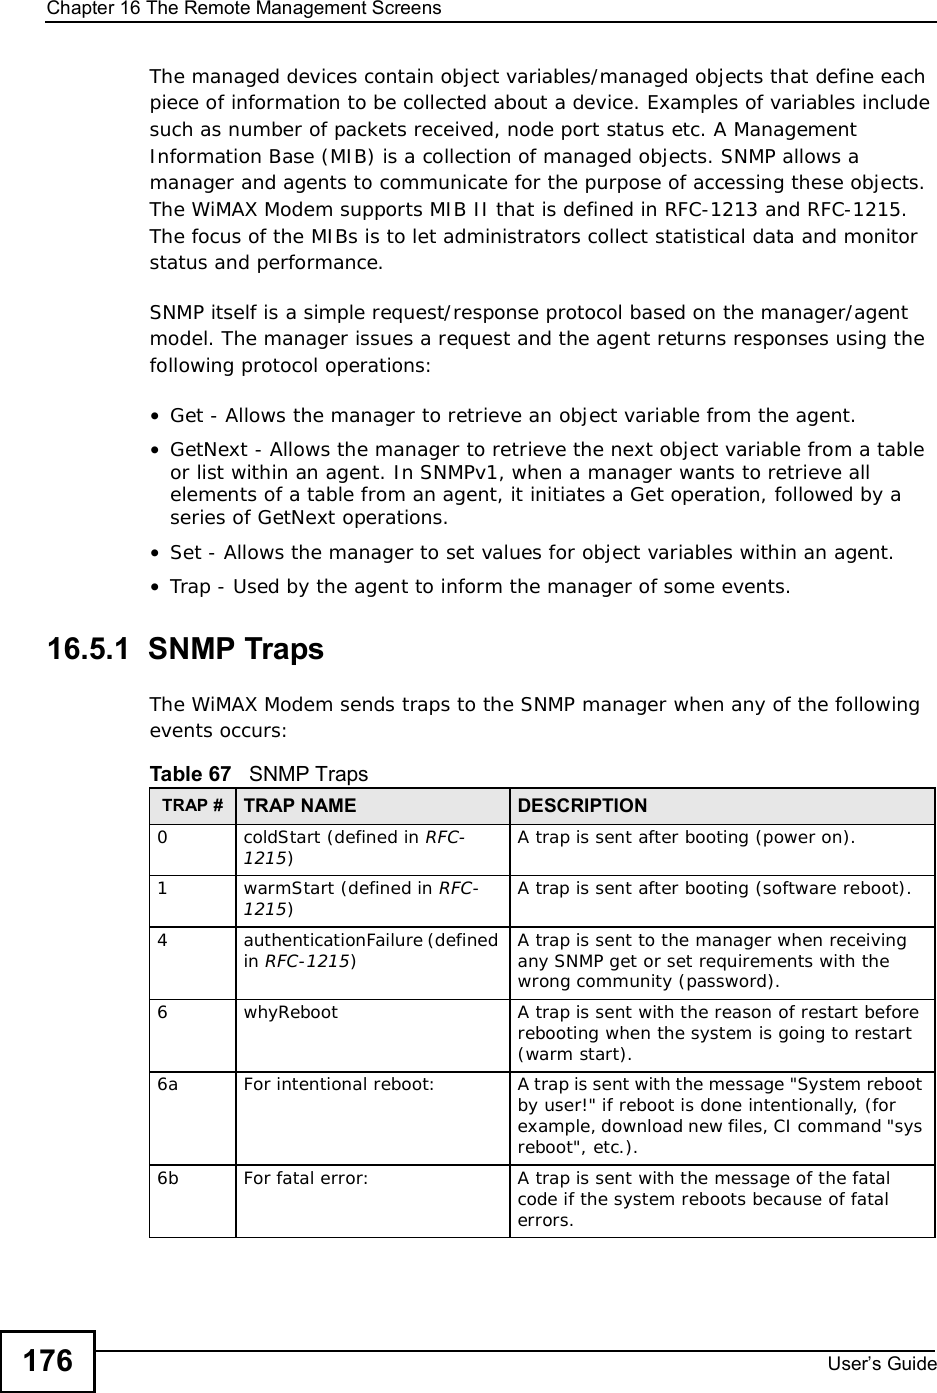 Chapter 16The Remote Management ScreensUser s Guide176The managed devices contain object variables/managed objects that define each piece of information to be collected about a device. Examples of variables include such as number of packets received, node port status etc. A Management Information Base (MIB) is a collection of managed objects. SNMP allows a manager and agents to communicate for the purpose of accessing these objects. The WiMAX Modem supports MIB II that is defined in RFC-1213 and RFC-1215. The focus of the MIBs is to let administrators collect statistical data and monitor status and performance.SNMP itself is a simple request/response protocol based on the manager/agent model. The manager issues a request and the agent returns responses using the following protocol operations: •Get - Allows the manager to retrieve an object variable from the agent. •GetNext - Allows the manager to retrieve the next object variable from a table or list within an agent. In SNMPv1, when a manager wants to retrieve all elements of a table from an agent, it initiates a Get operation, followed by a series of GetNext operations. •Set - Allows the manager to set values for object variables within an agent. •Trap - Used by the agent to inform the manager of some events.16.5.1  SNMP TrapsThe WiMAX Modem sends traps to the SNMP manager when any of the following events occurs:          Table 67   SNMP TrapsTRAP # TRAP NAME DESCRIPTION0coldStart (defined in RFC-1215)A trap is sent after booting (power on).1warmStart (defined in RFC-1215)A trap is sent after booting (software reboot).4 authenticationFailure (defined in RFC-1215)A trap is sent to the manager when receiving any SNMP get or set requirements with the wrong community (password).6whyReboot  A trap is sent with the reason of restart before rebooting when the system is going to restart (warm start).6a For intentional reboot: A trap is sent with the message &quot;System reboot by user!&quot; if reboot is done intentionally, (for example, download new files, CI command &quot;sys reboot&quot;, etc.).6b For fatal error:  A trap is sent with the message of the fatal code if the system reboots because of fatal errors.